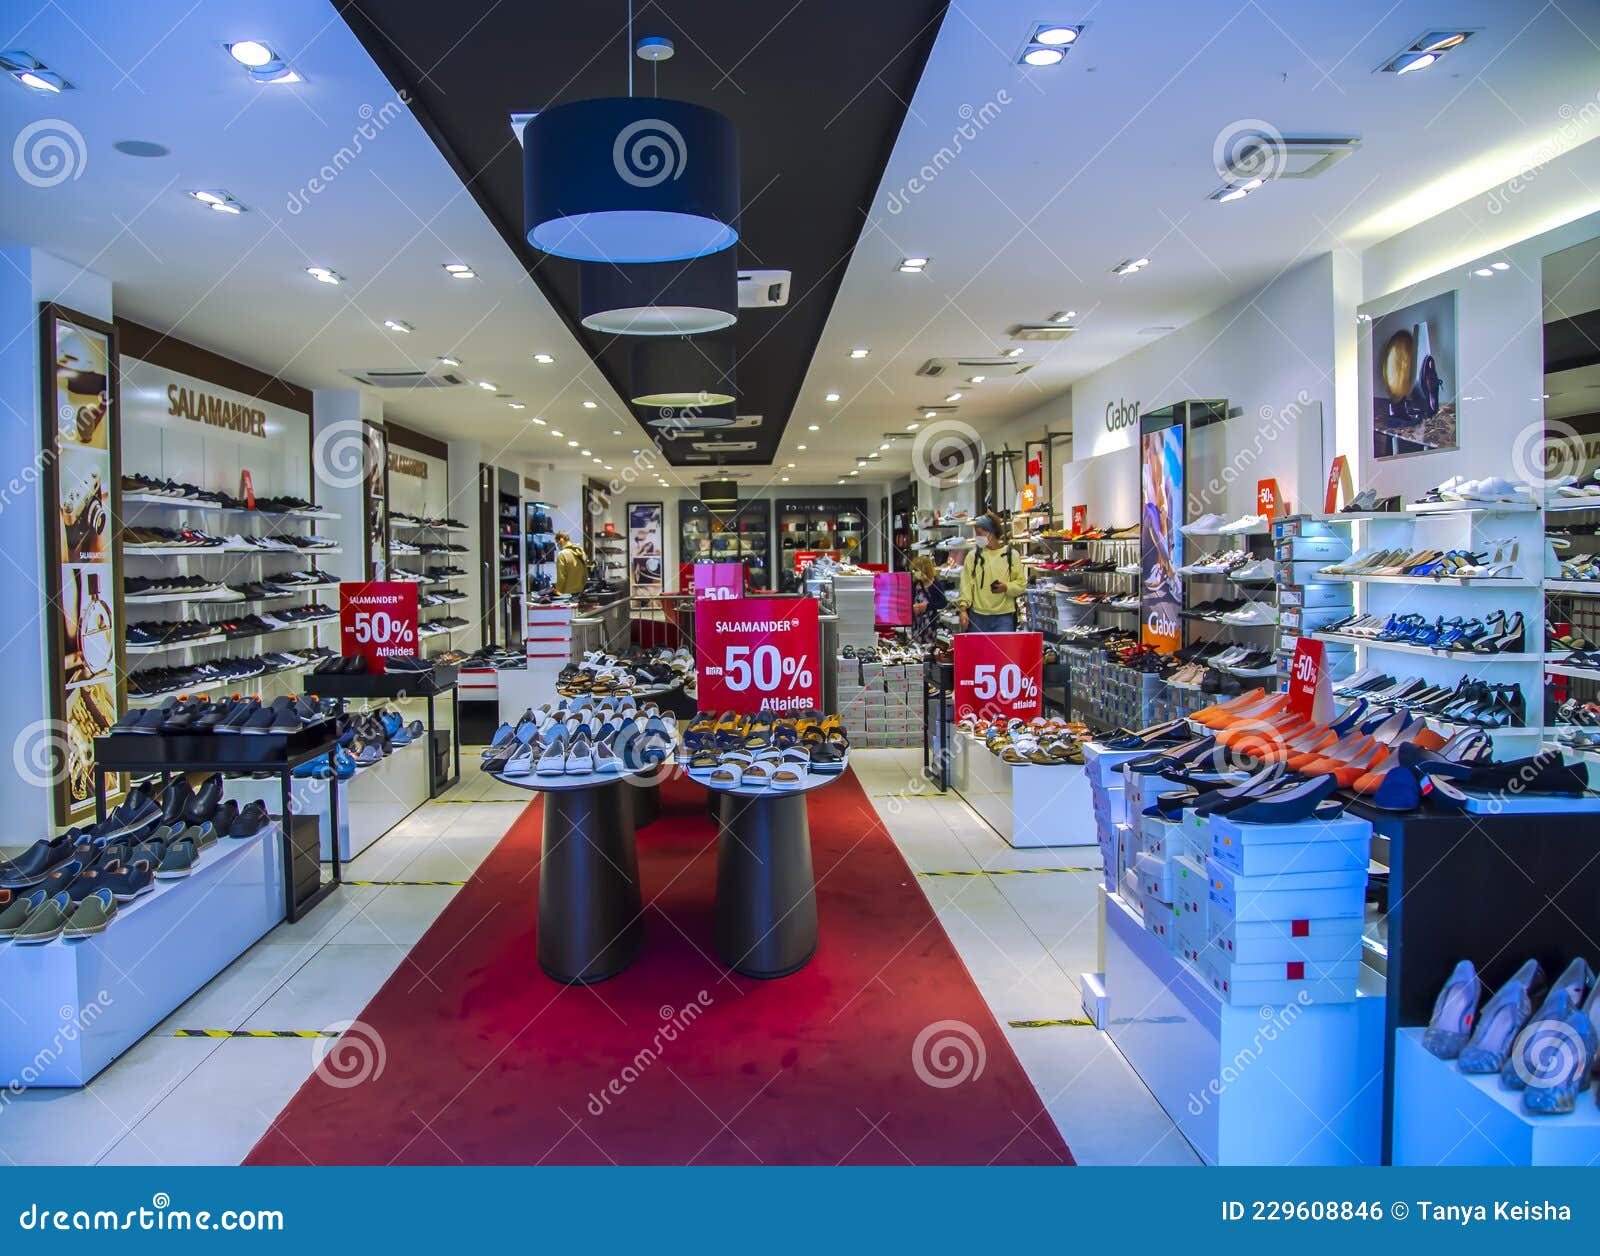 Shelves with Variety Brands of Quality Shoes with Big Discounts ...